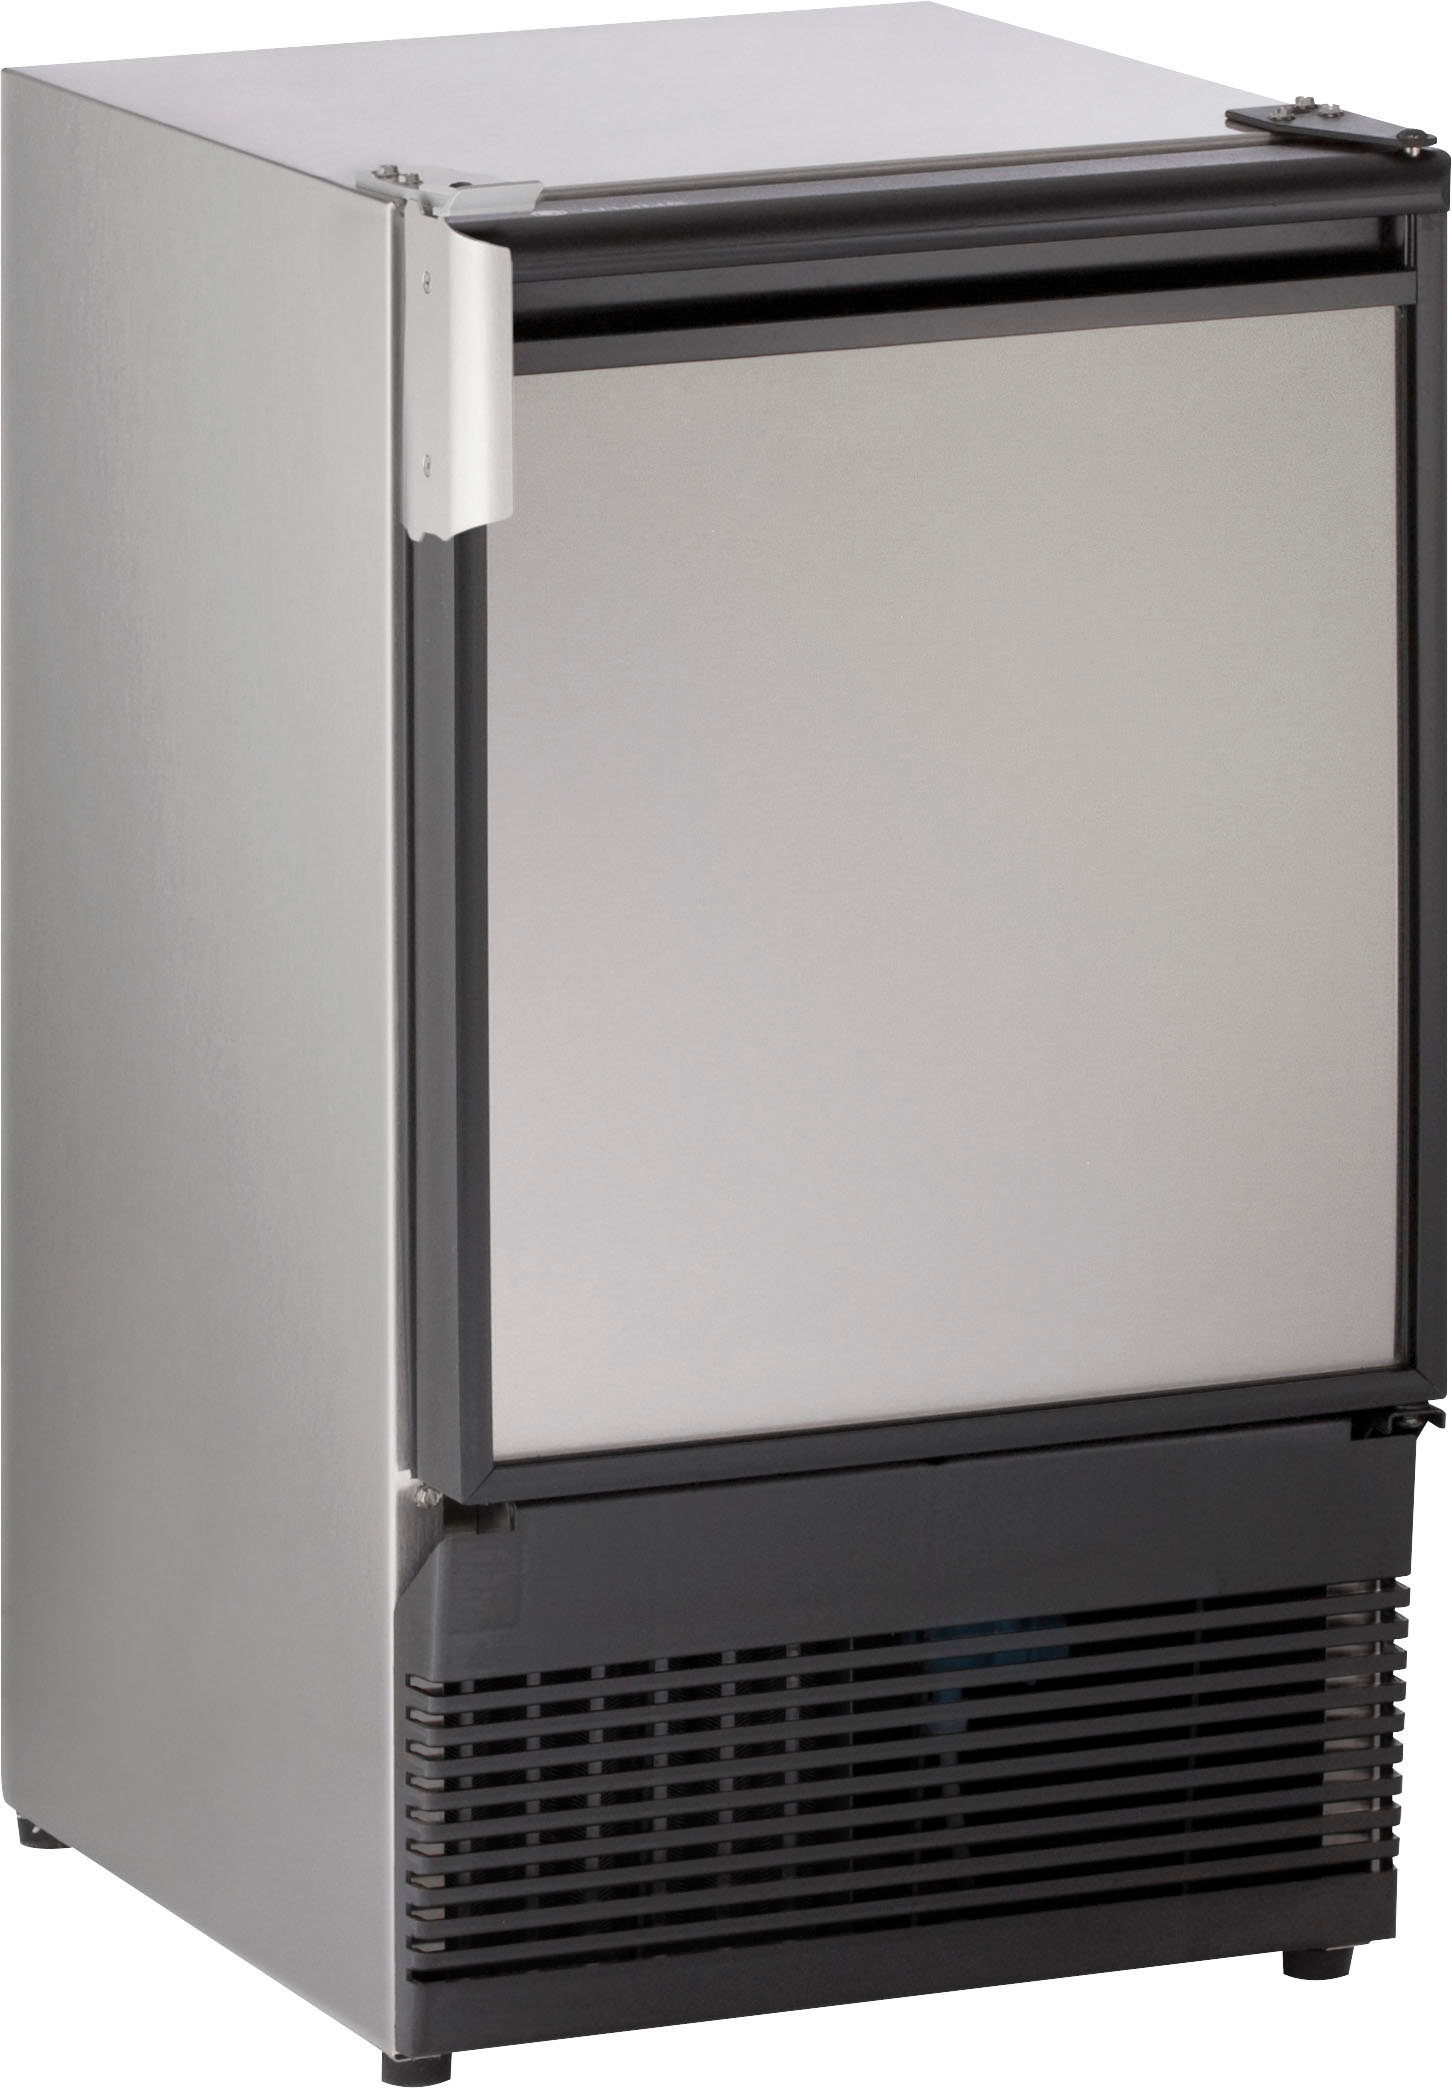 Angle View: U-Line - 15" 55-Lb. Freestanding Icemaker - Stainless Steel